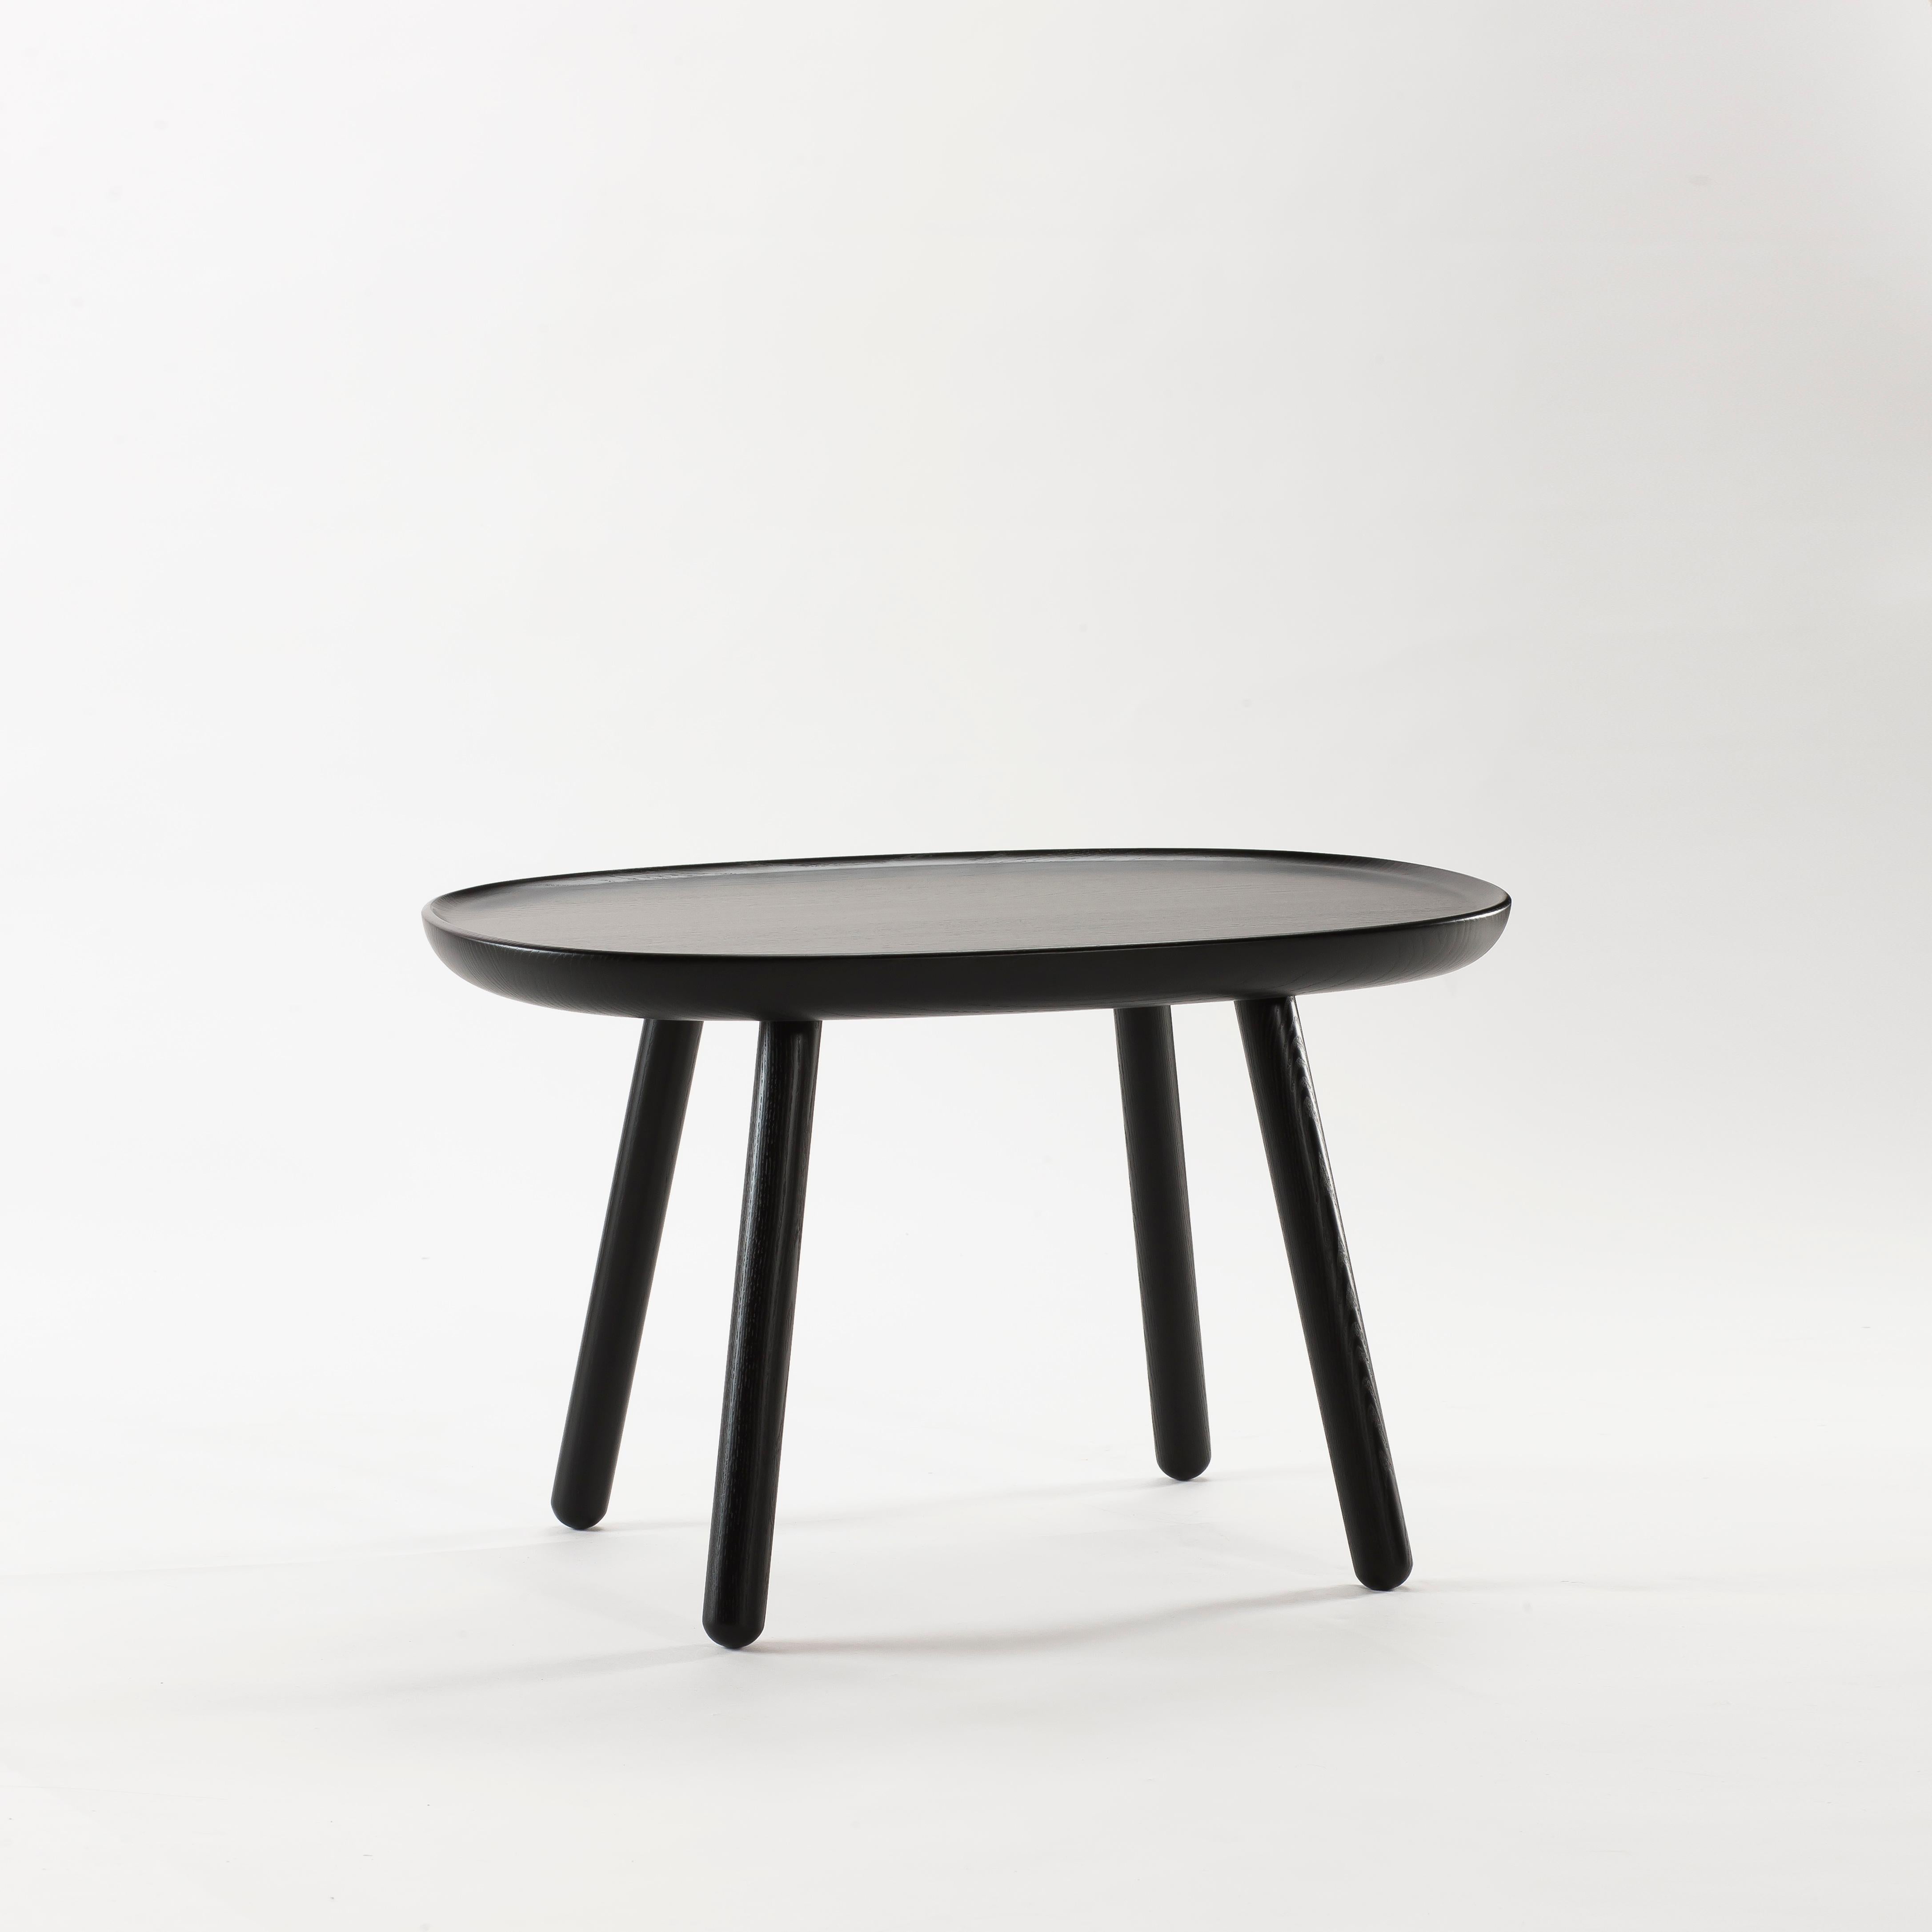 Naïve side tables are available in three sizes, each carved out of a single piece of solid ash. A form in between a square and a circle creates a soft and welcoming appearance and will easily adapt to any type of room. The tables can be easily